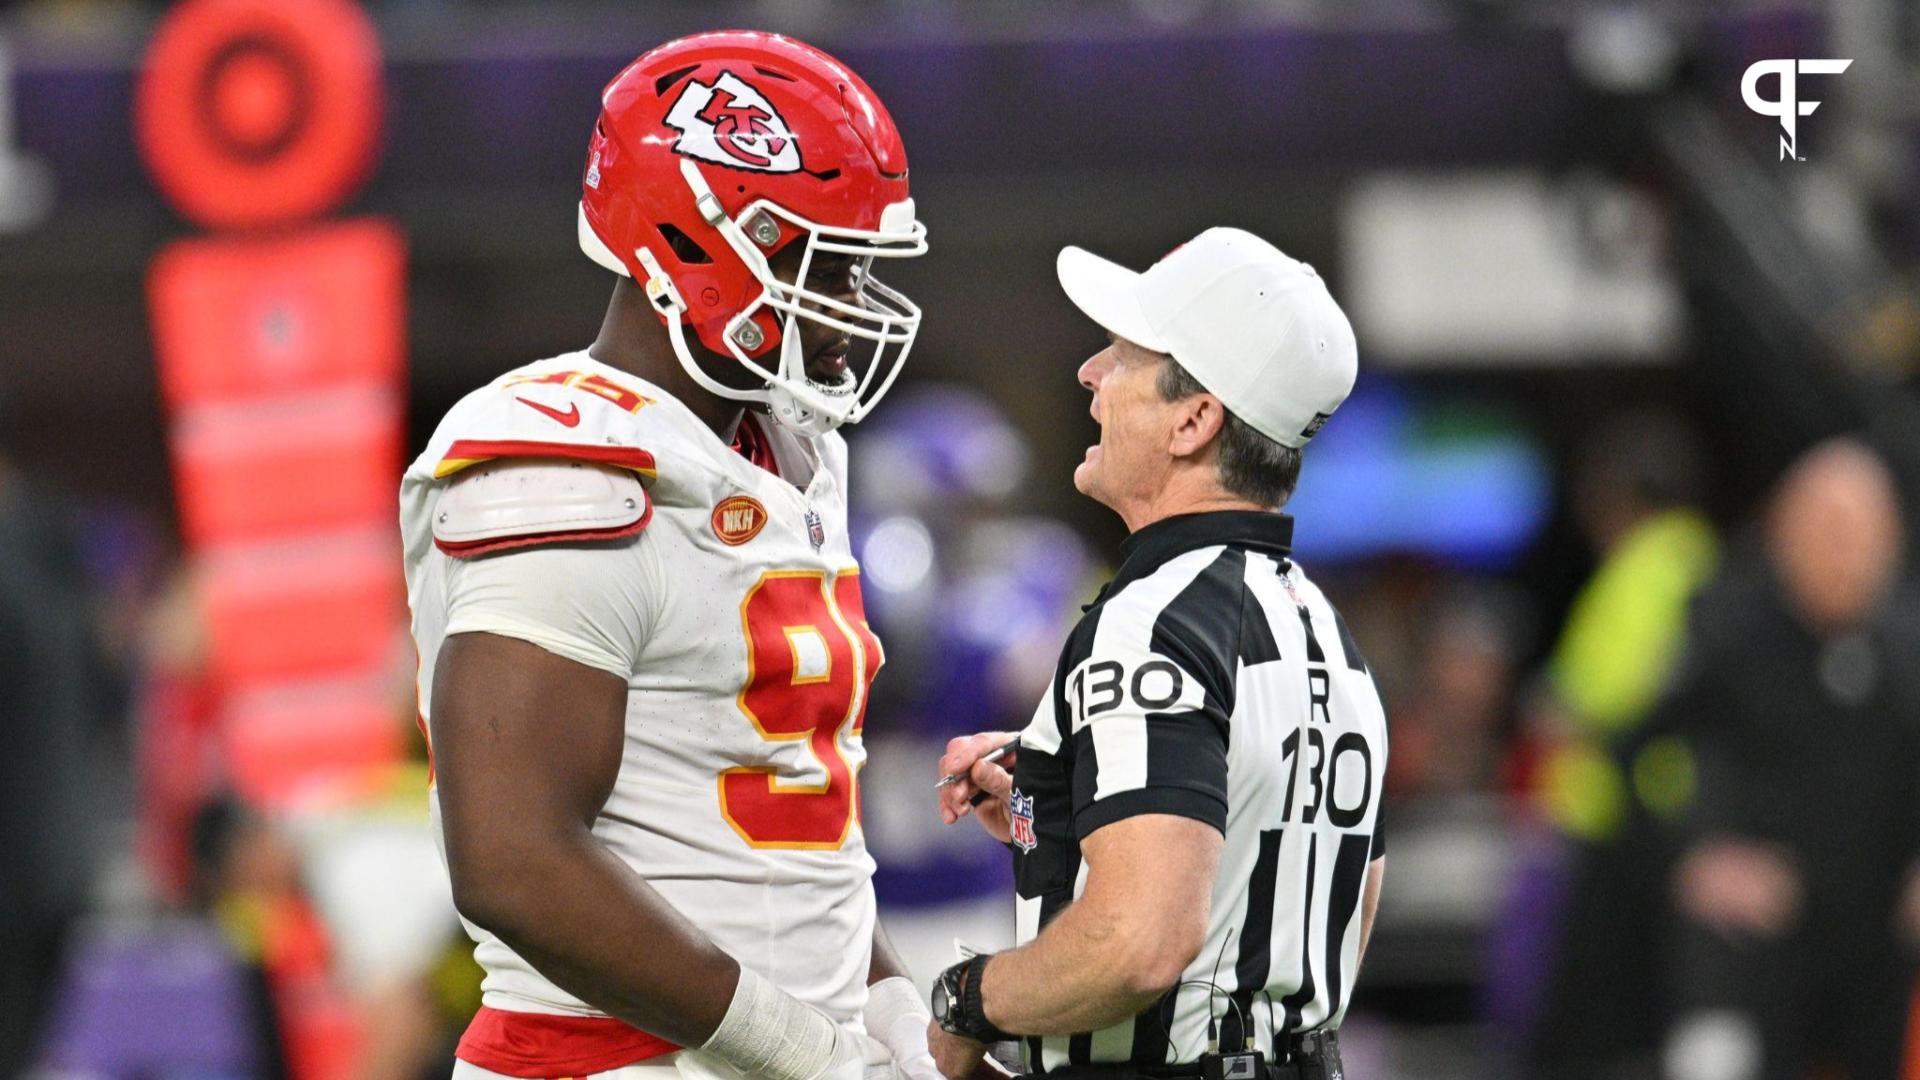 Chris Jones (95) talks with an official during the fourth quarter against the Minnesota Vikings at U.S. Bank Stadium.